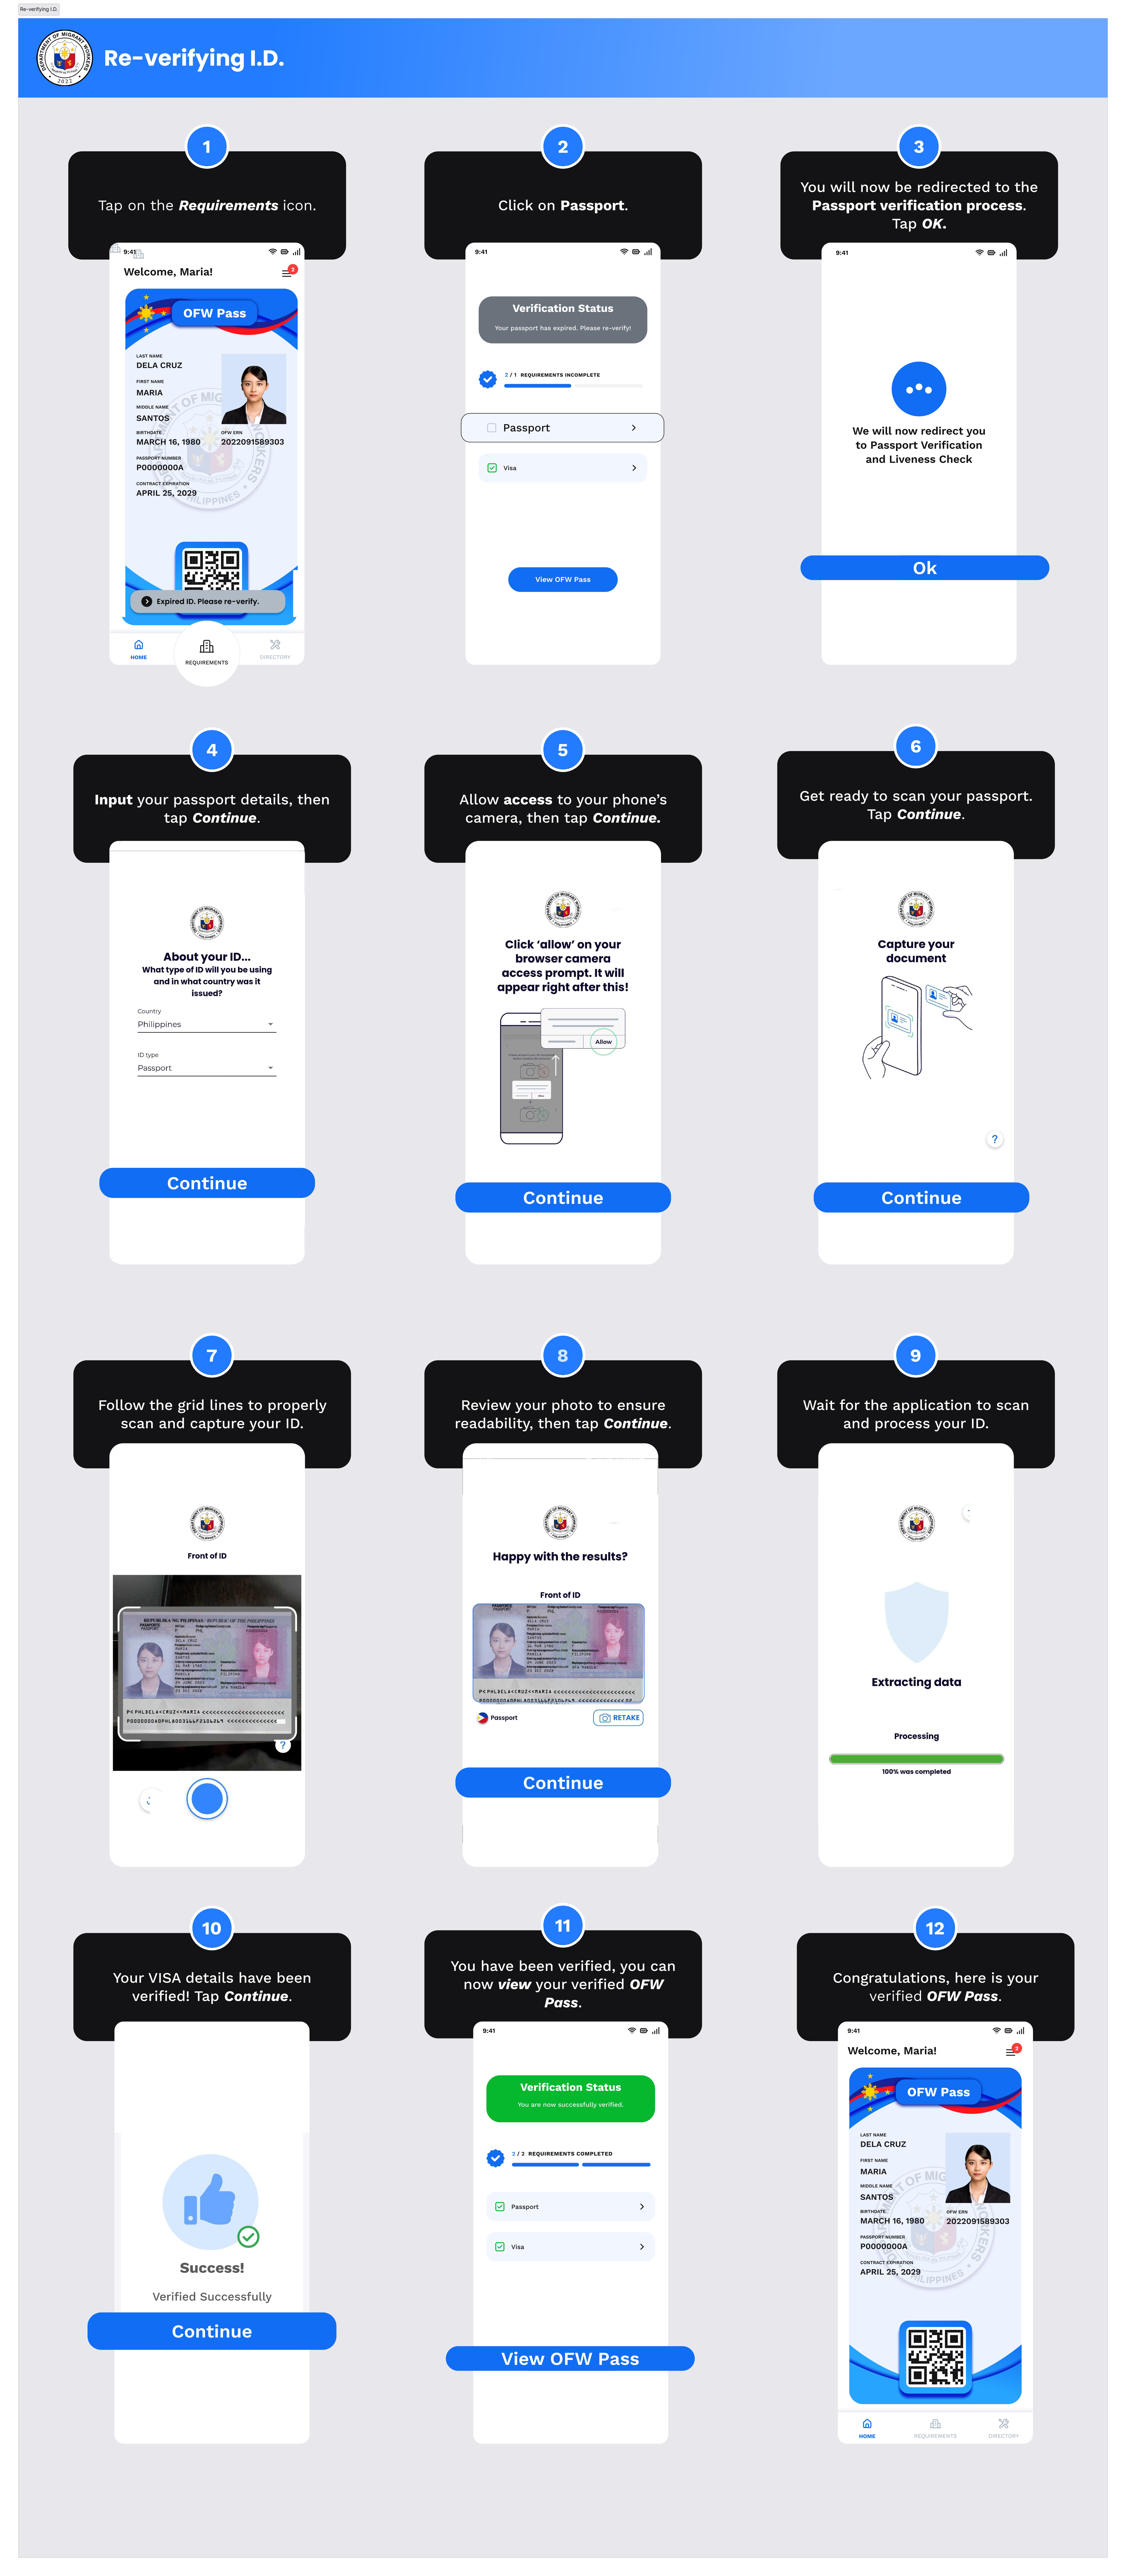 Re-verifying the ID OFW Pass DMW mobile App